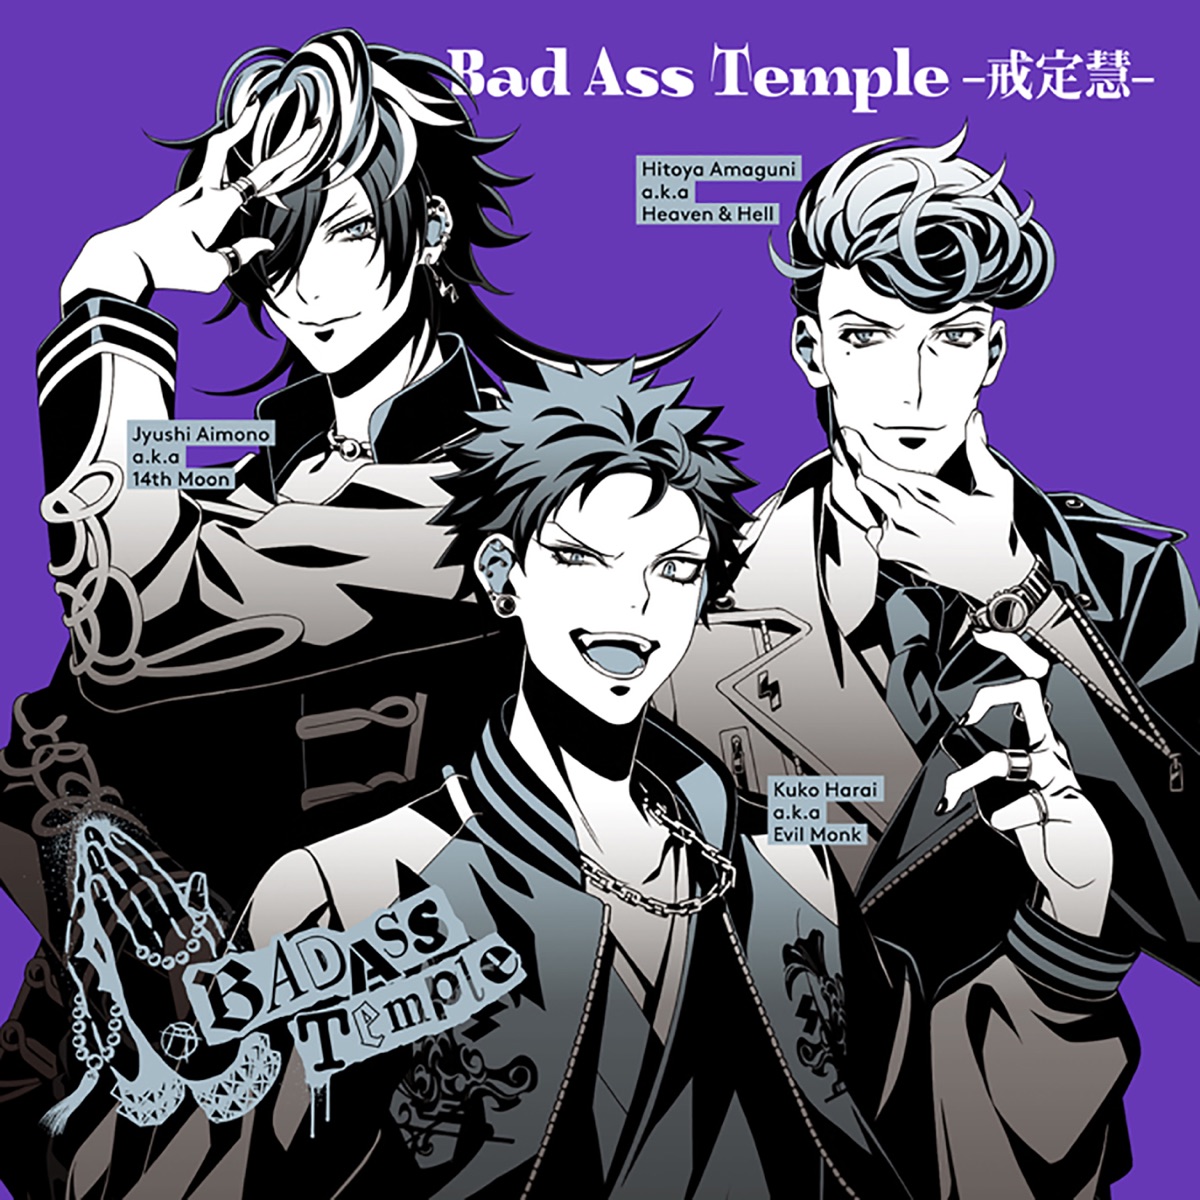 Bad Ass Temple Funky Sounds ナゴヤ・ディビジョン - アニメ